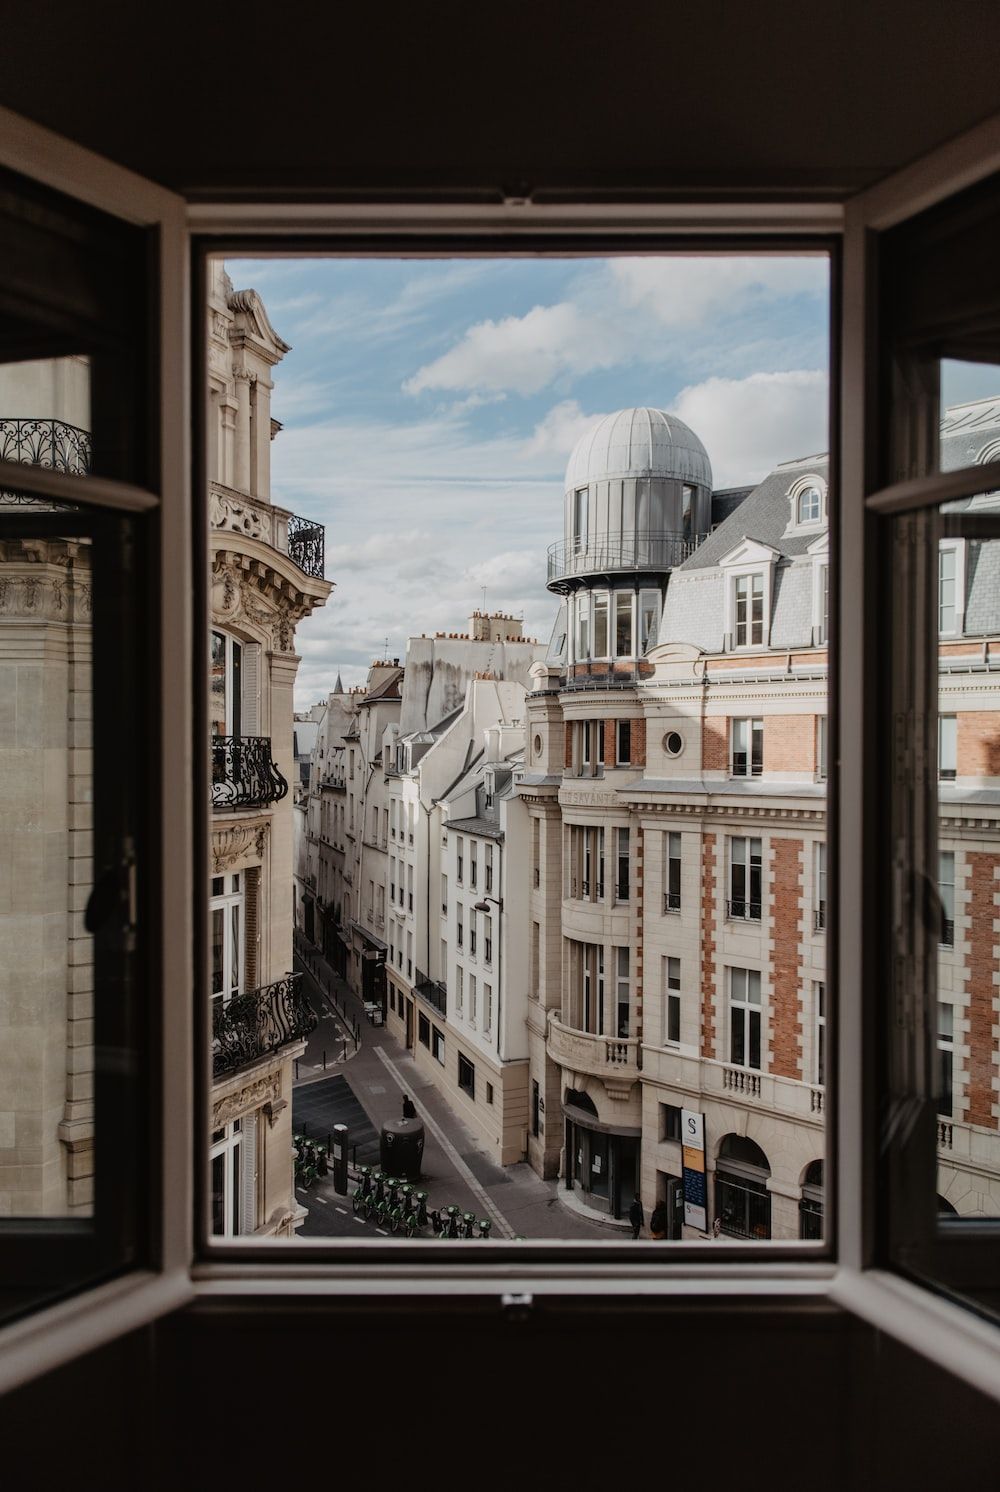 A window looking out onto a Parisian street - France